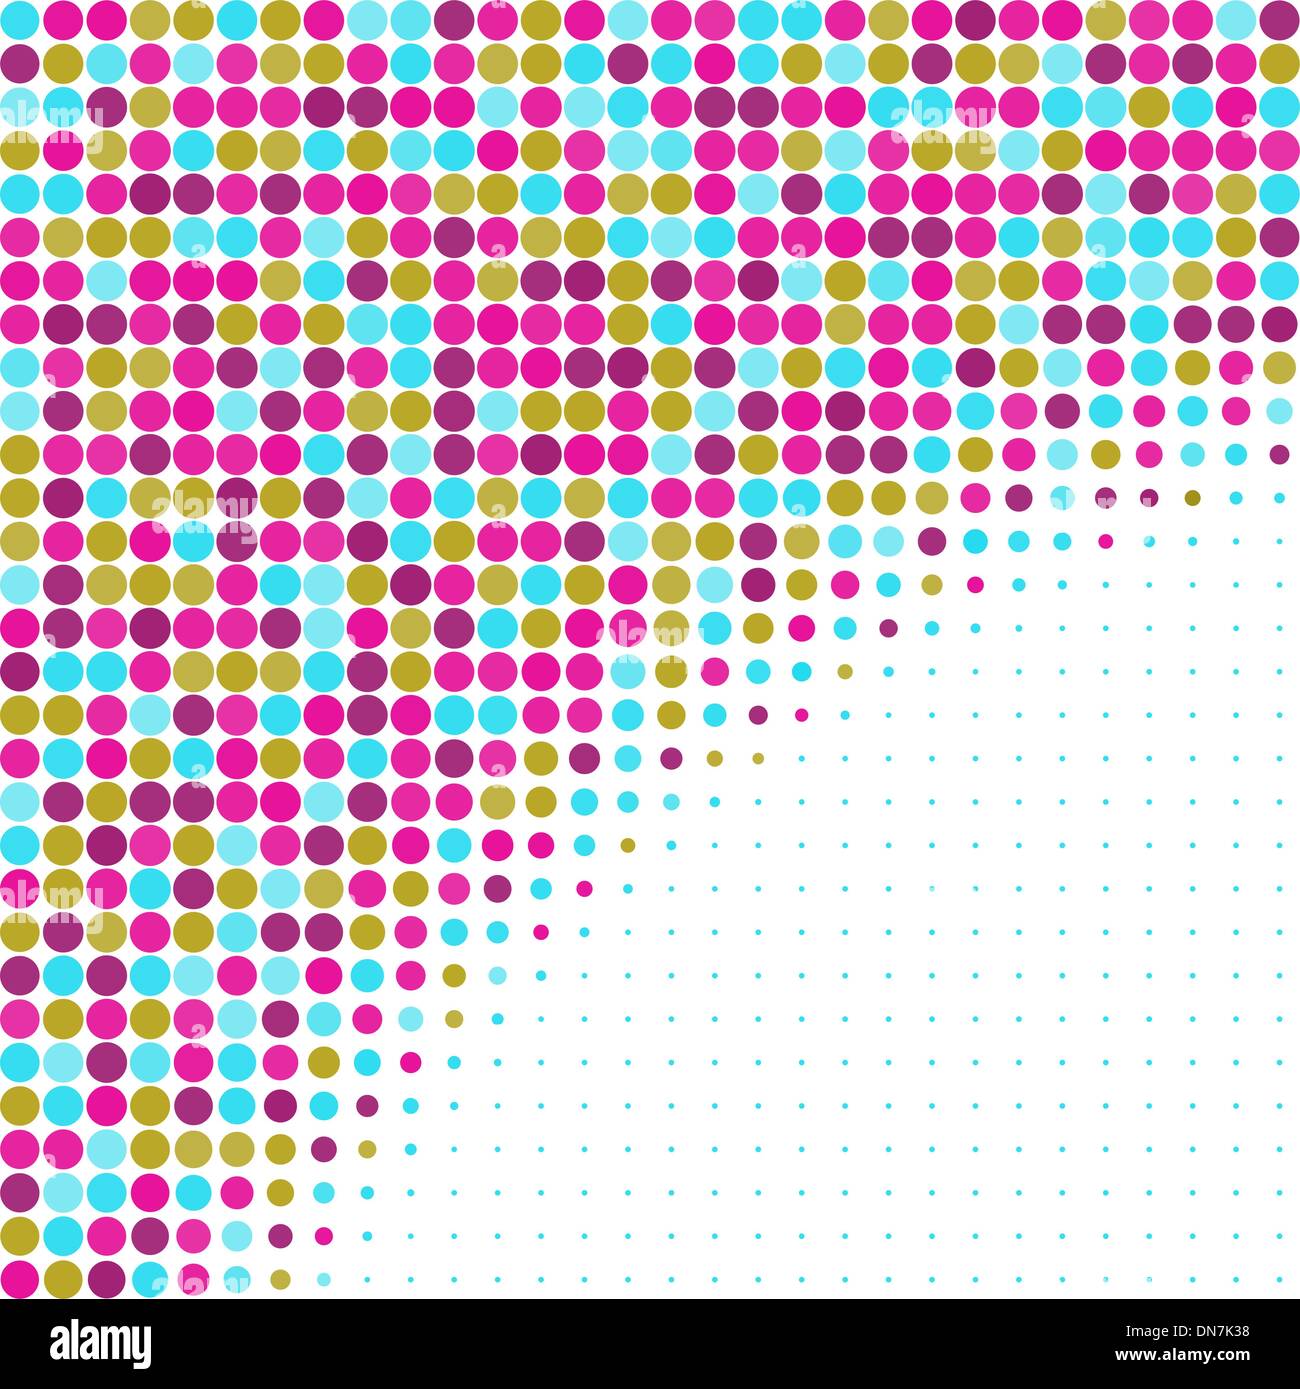 Abstract Blue Dots Vector Background Stock Vector